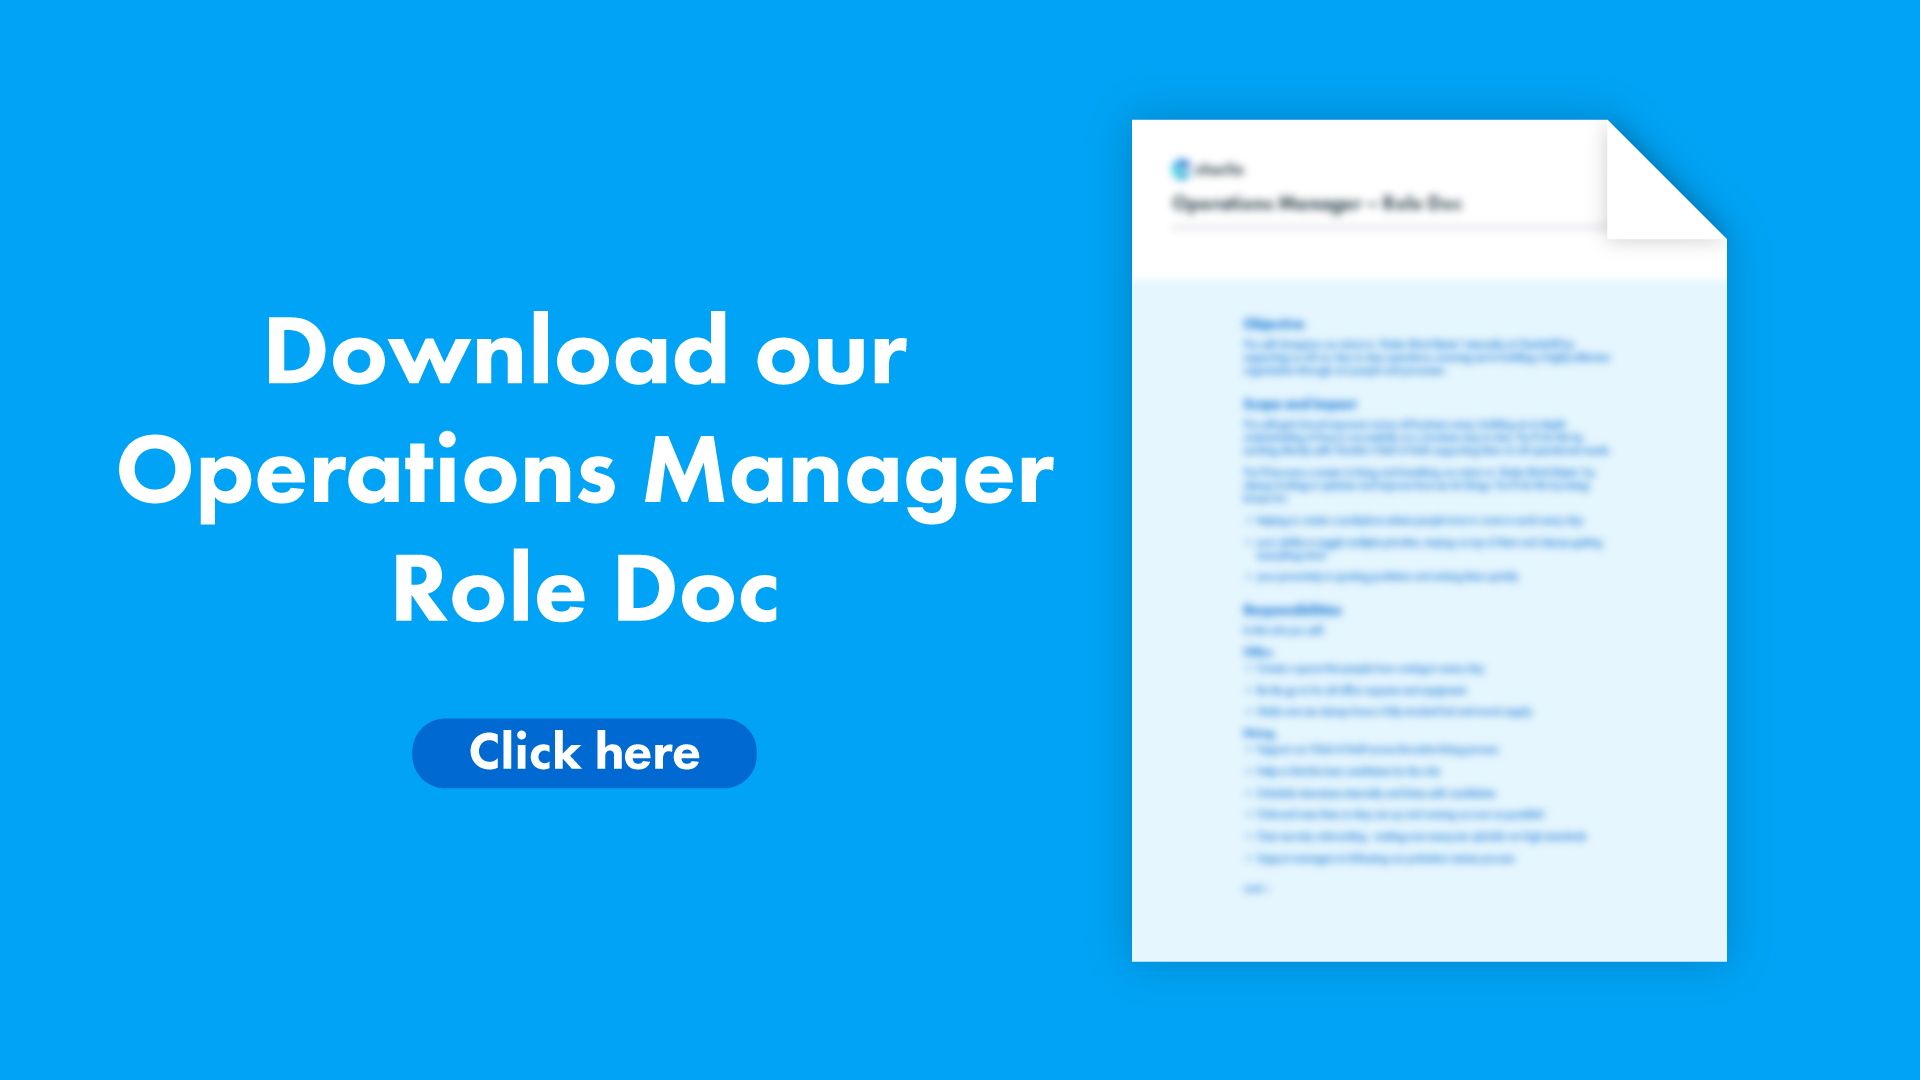 Click here to download our operations manager role document